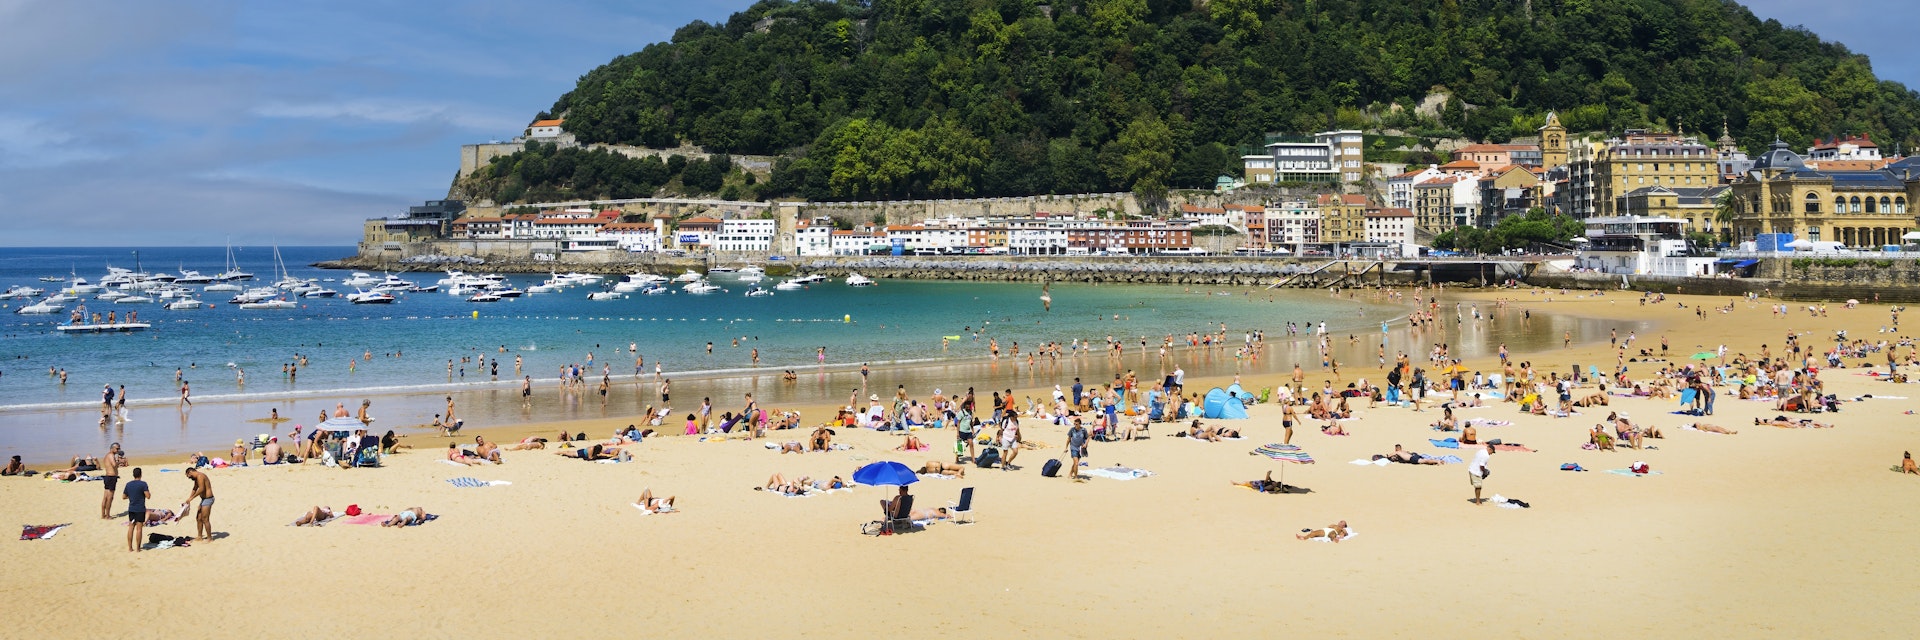 Landscape of La Concha beach in the city of San Sebastian, in the Spanish Basque Country, on a sunny day with people enjoying the beach and Mount Urgull in the background.